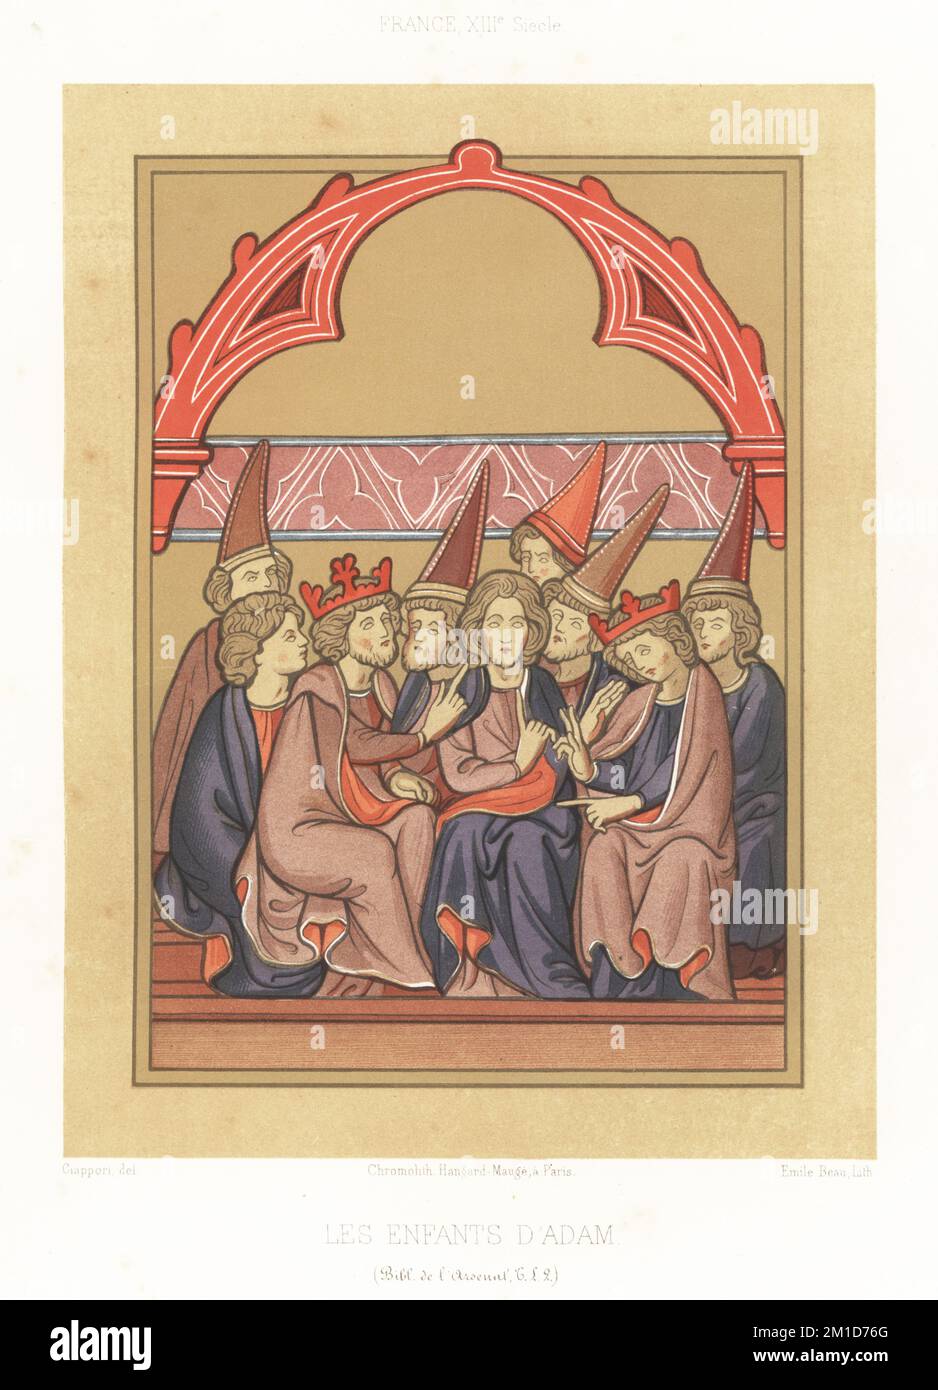 The children of Adam from Noah to Abraham to Ismael. Les Enfants d'Adam. Men dressed in mantle and robe, wearing crowns and conical hats. From the Book of Chronicles in a manuscript Bible, MS T.L. 2, Bibliotheque de l'Arsenal, 13th century. France, XIIIe Siecle. Chromolithograph by Emile Beau after an illustration by Claudius Joseph Ciappori from Charles Louandre’s Les Arts Somptuaires, The Sumptuary Arts, Hangard-Mauge, Paris, 1858. Stock Photo